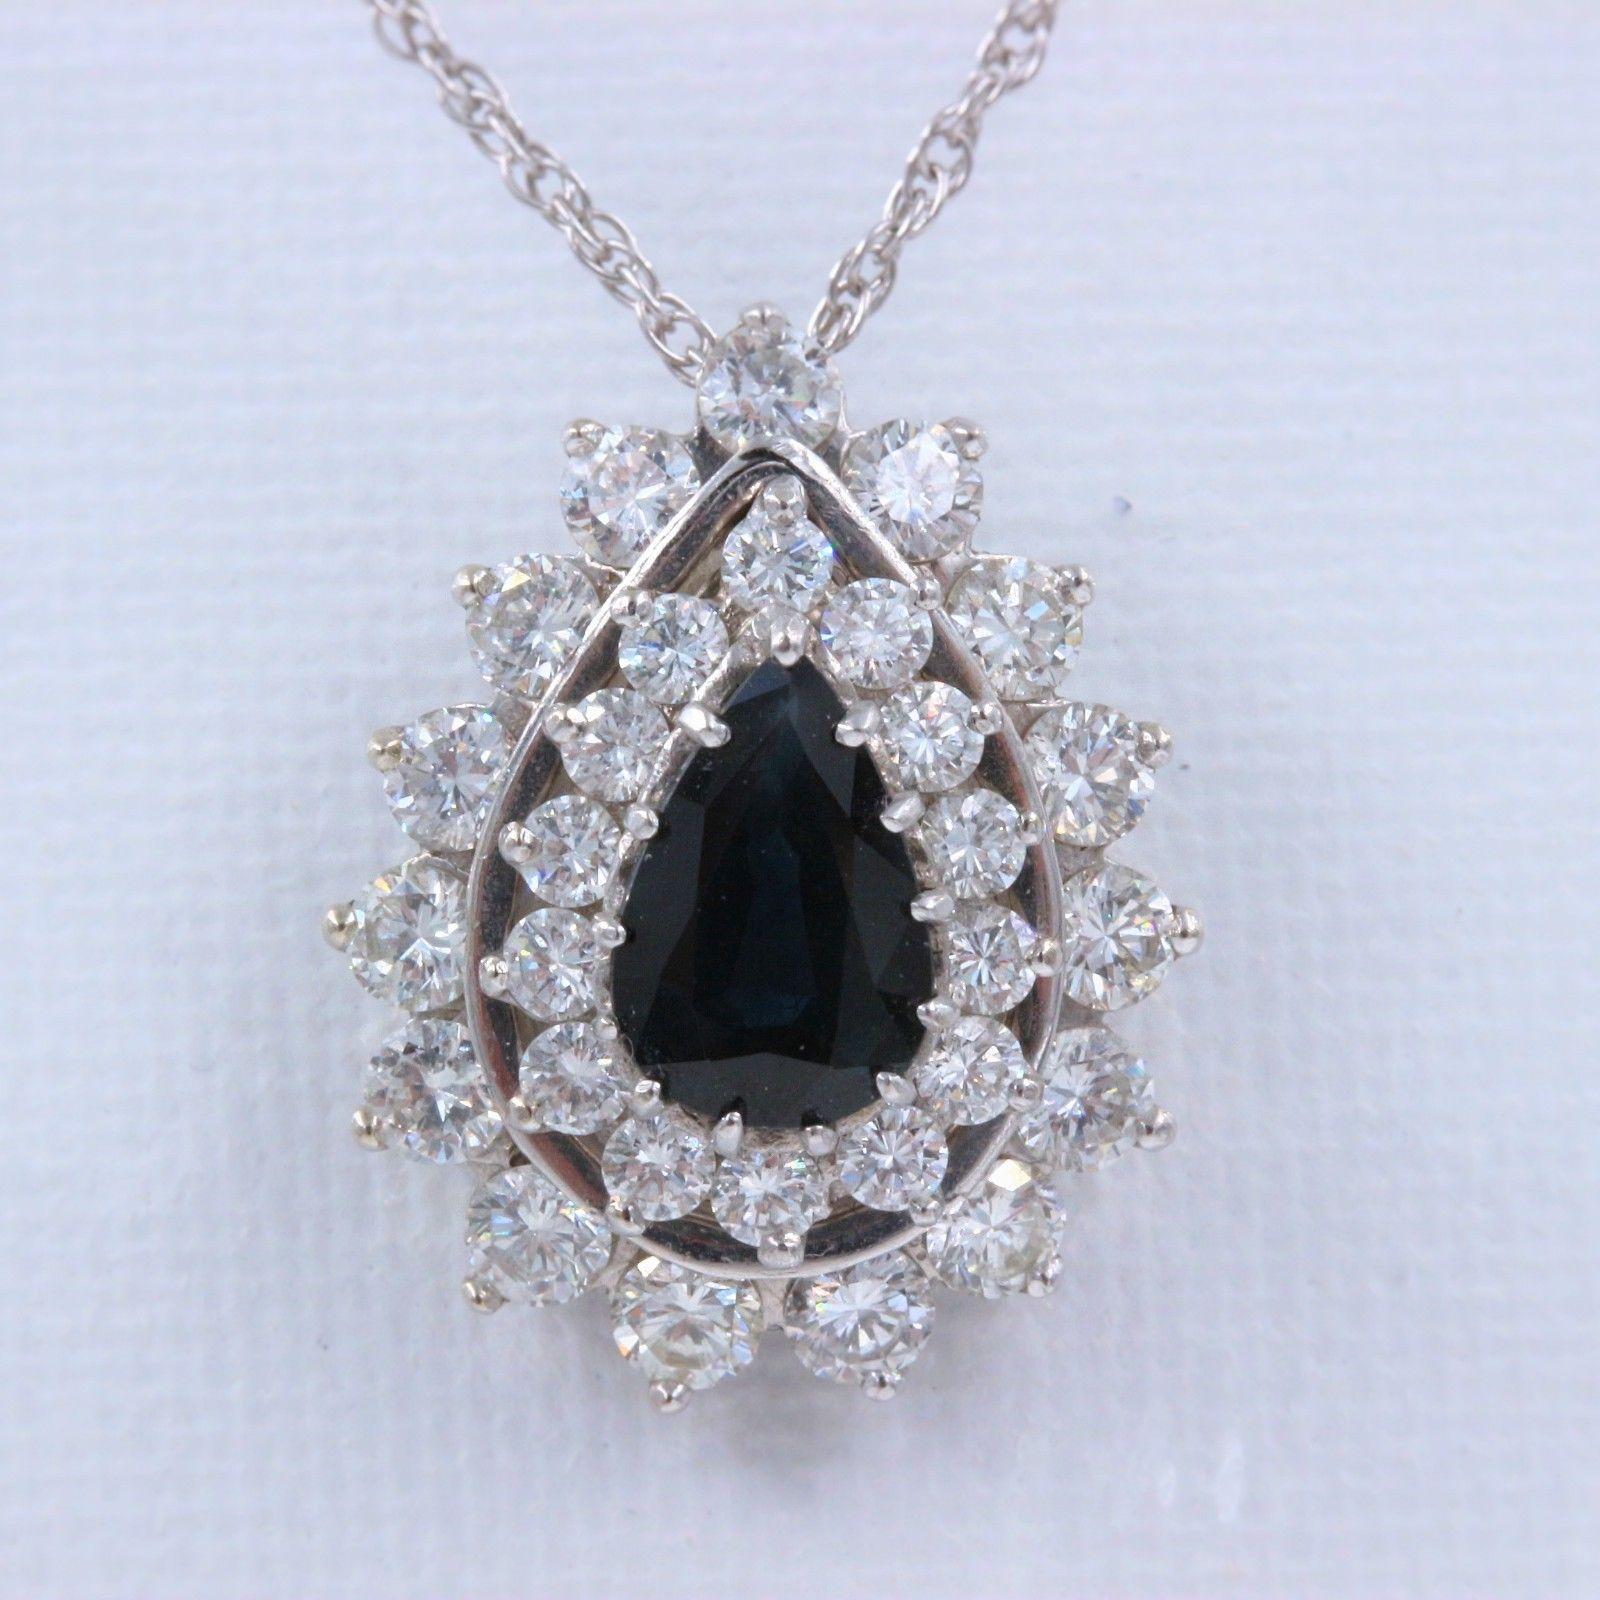 SAPPHIRE & DIAMOND PENDANT NECKLACE
Metal:  14K White Gold
Length:  15 Inches
Pendant Width:  .75 X .60 Inches X 9 MM Height
Total Carat Weight: 4.78 tcw
Center Stone:  Pear Shape Dark Blue Sapphire 2.44 cts
Diamonds:  29 Round Diamonds 2.34 tcw